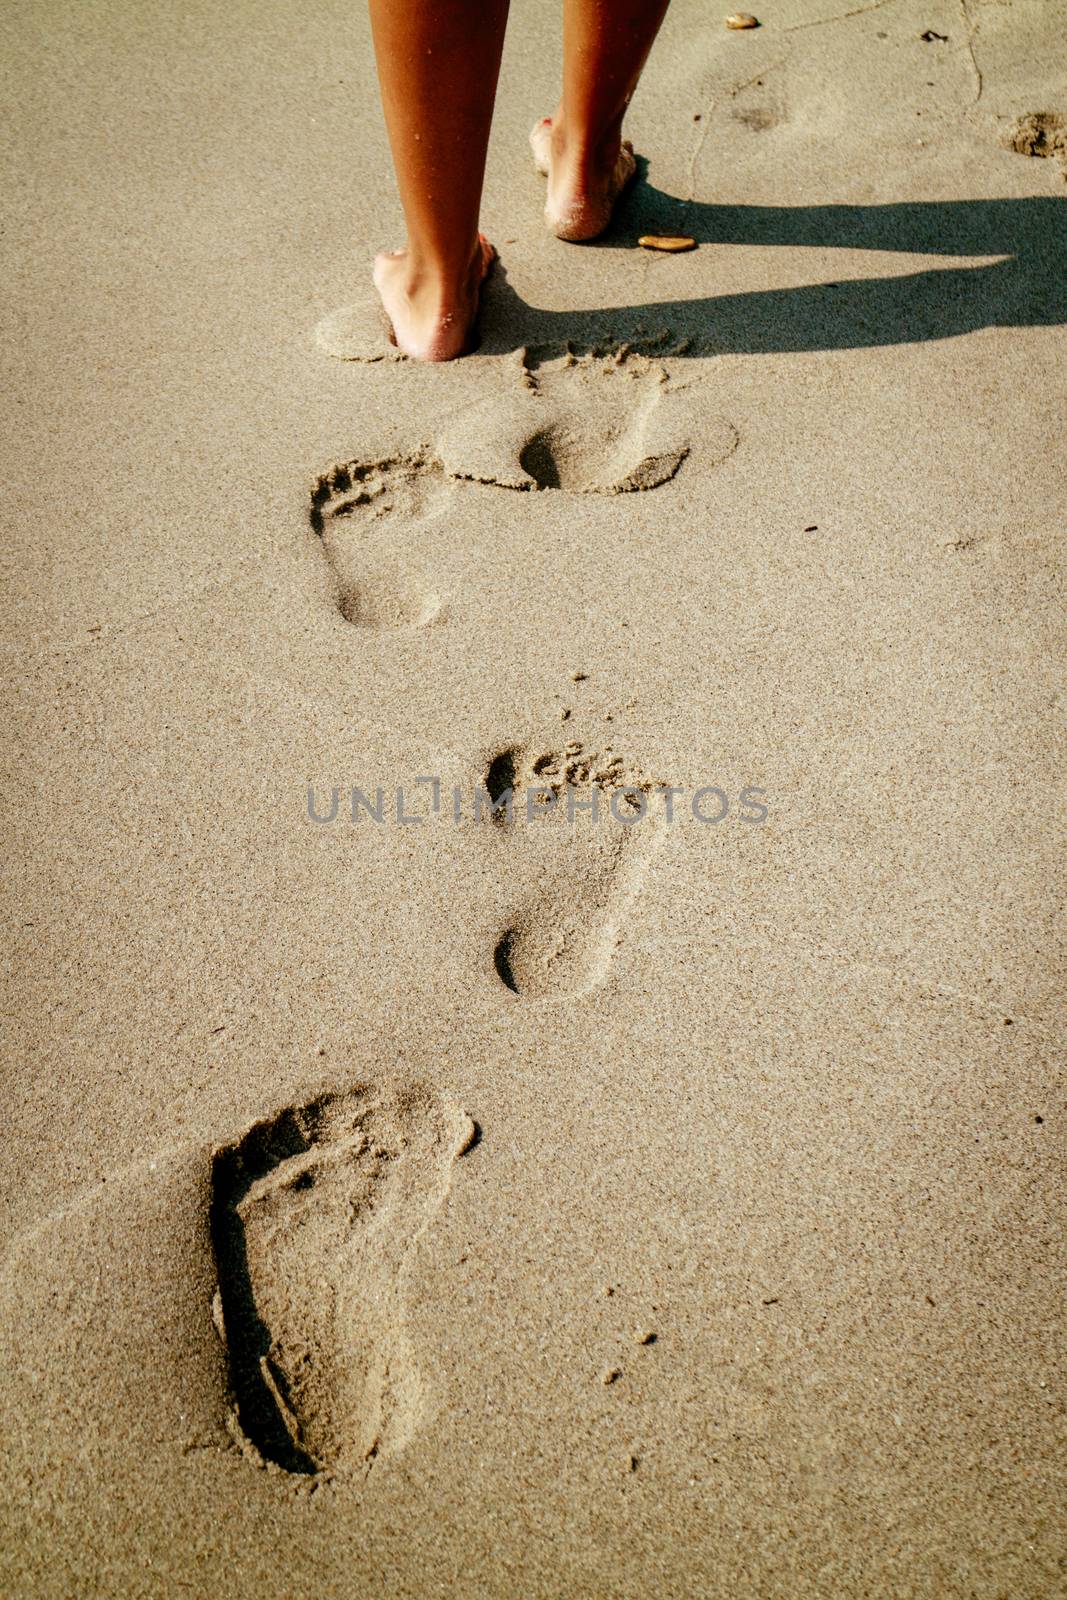 Footprints In The Sand by MilanMarkovic78